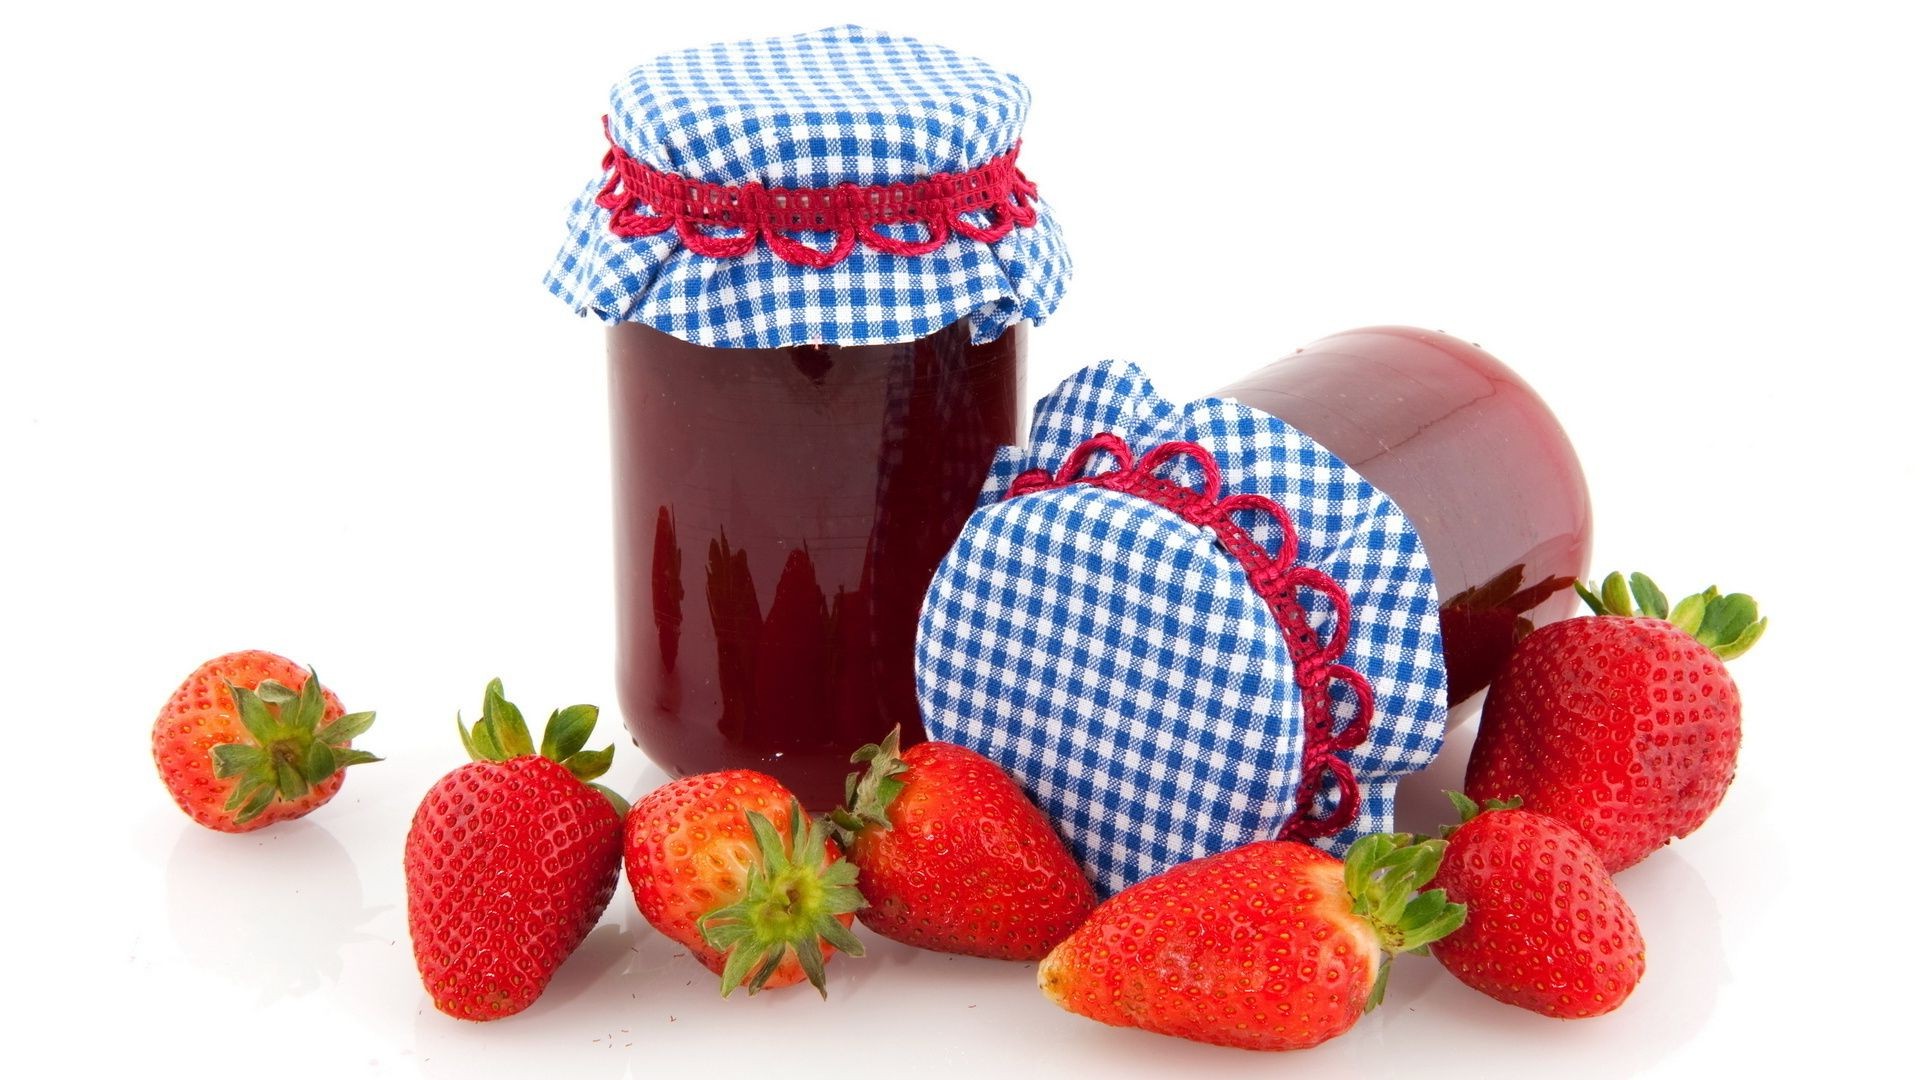 food & drink strawberry sweet food berry delicious jam fruit healthy marmalade nutrition jar refreshment health juicy summer breakfast tasty confection diet